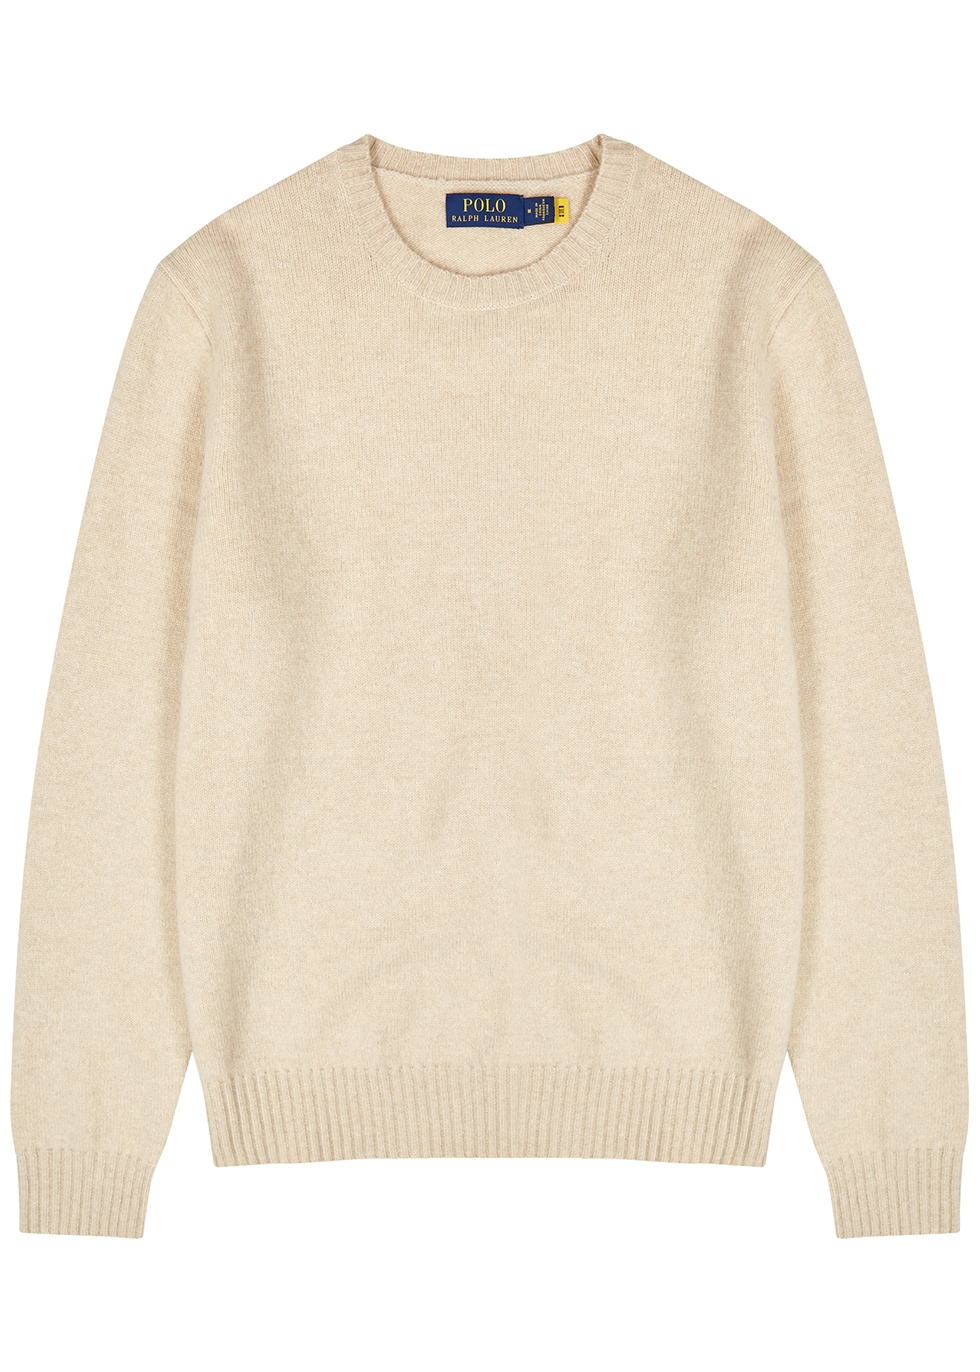 Stone wool and cashmere-blend jumper